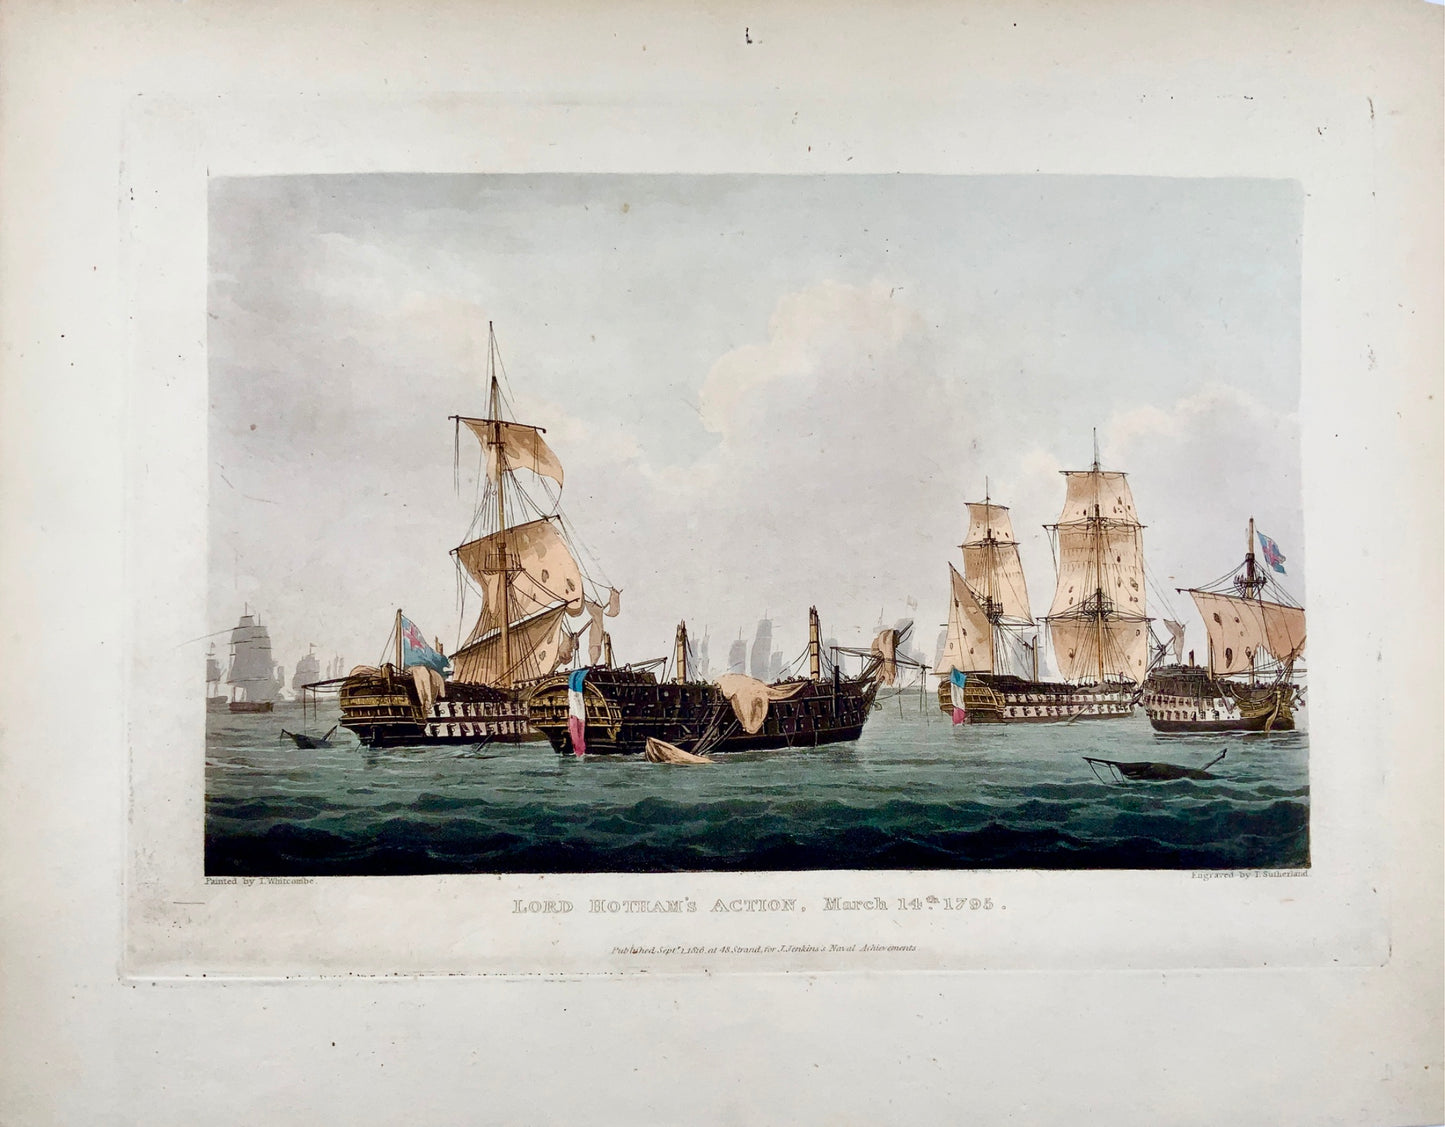 1816 Whitcombe; Sutherland - Maritime : L'action de Lord Hotham Guerres révolutionnaires - Navires, bataille navale